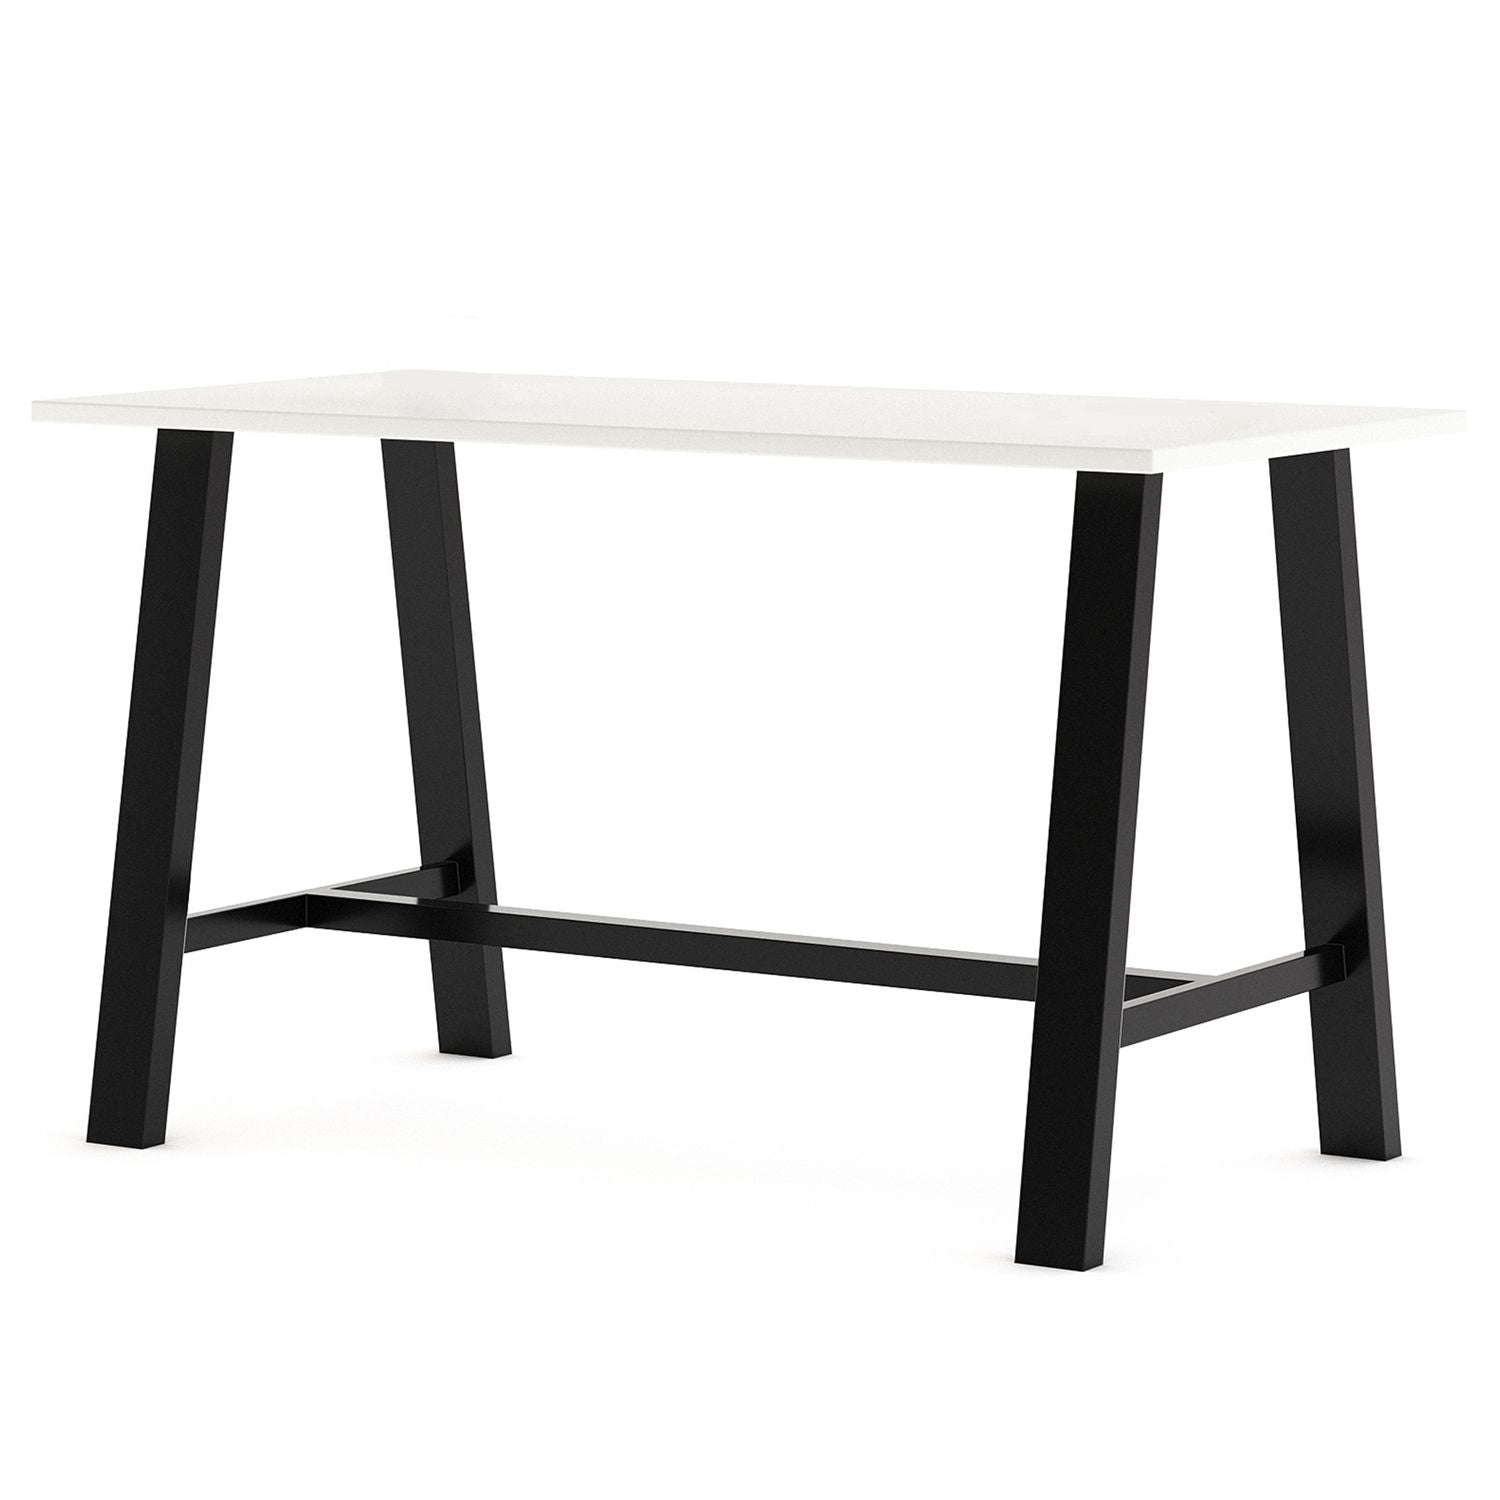 midtown-dining-table-with-four-navy-kool-series-chairs-36-x-72-x-30-designer-white-ships-in-4-6-business-days_kfi840031900241 - 4